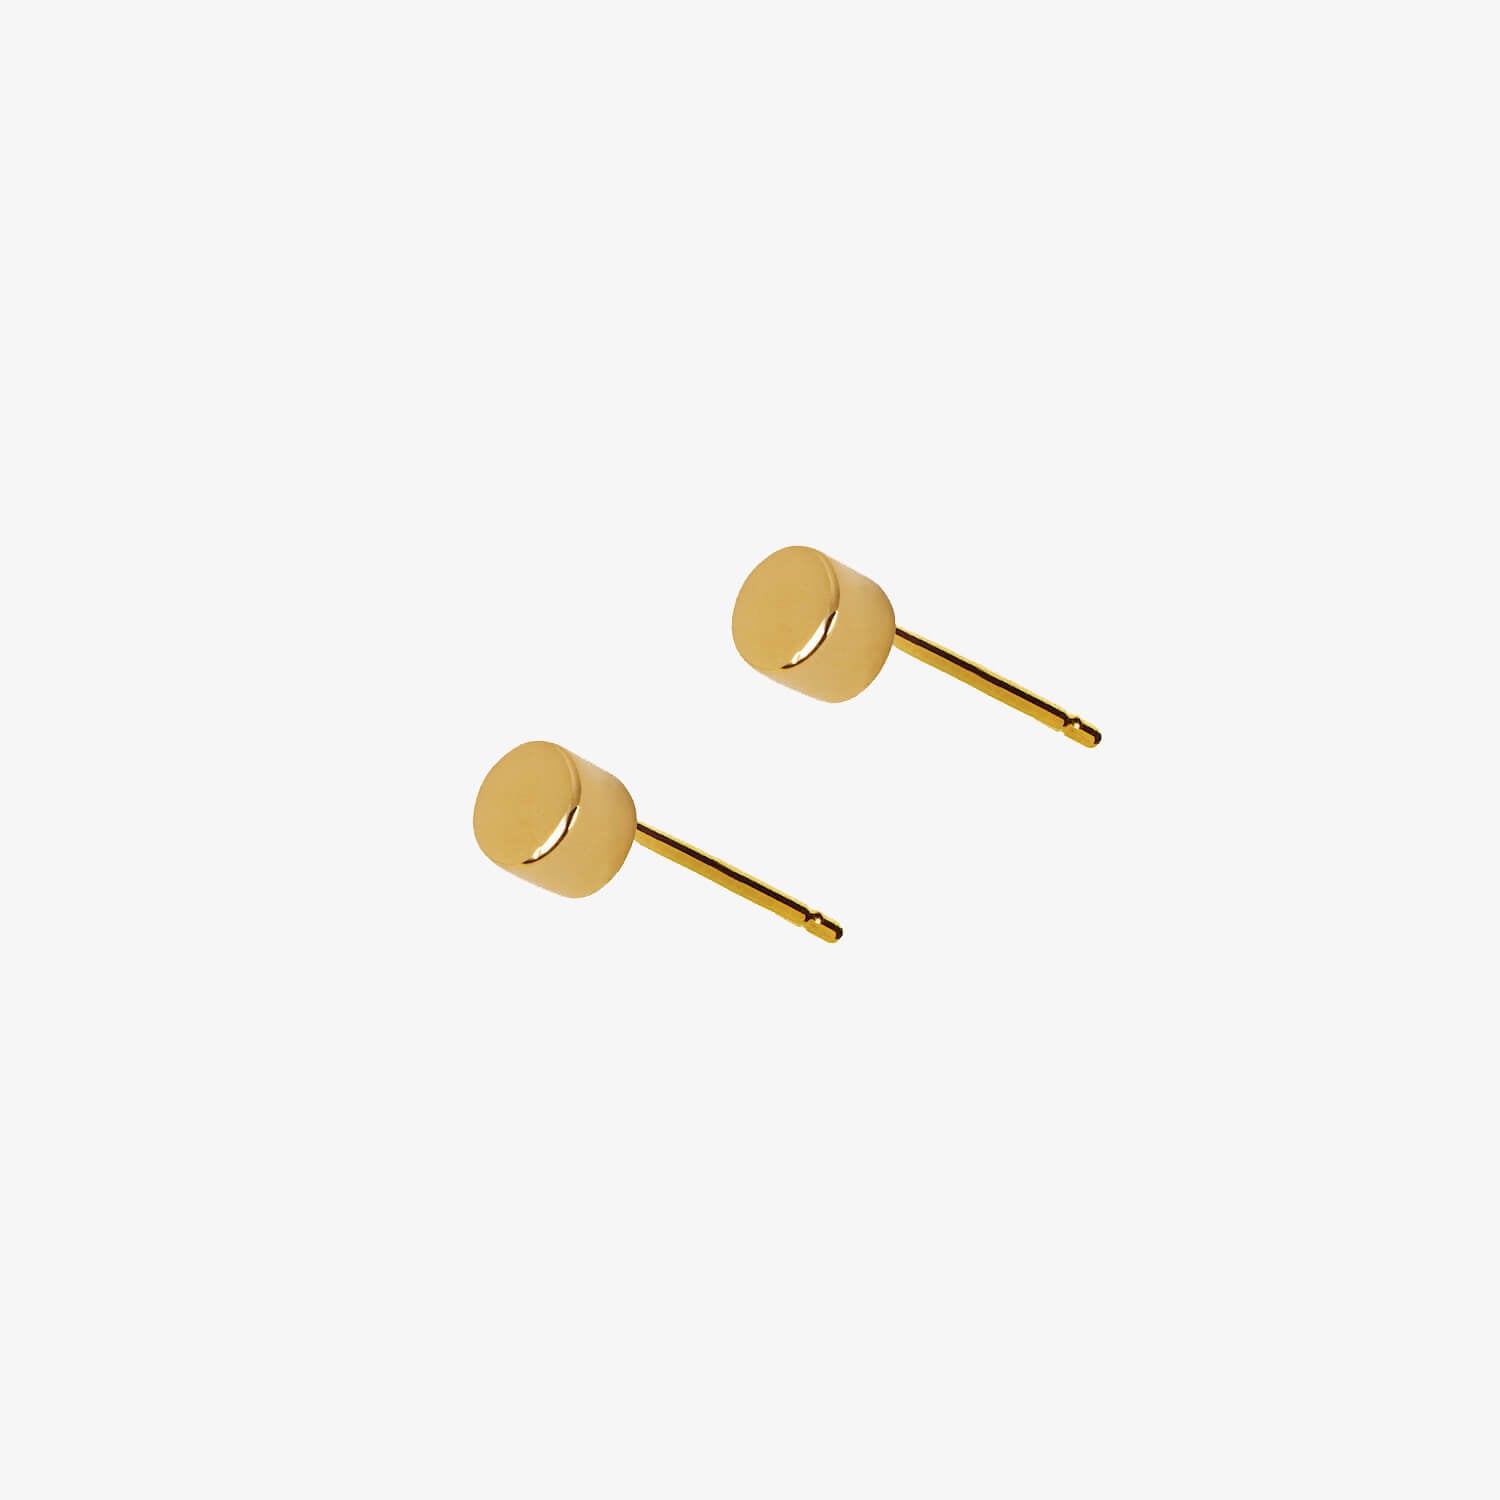 Simple gold vermeil dot stud earrings by Matthew Calvin on a white background